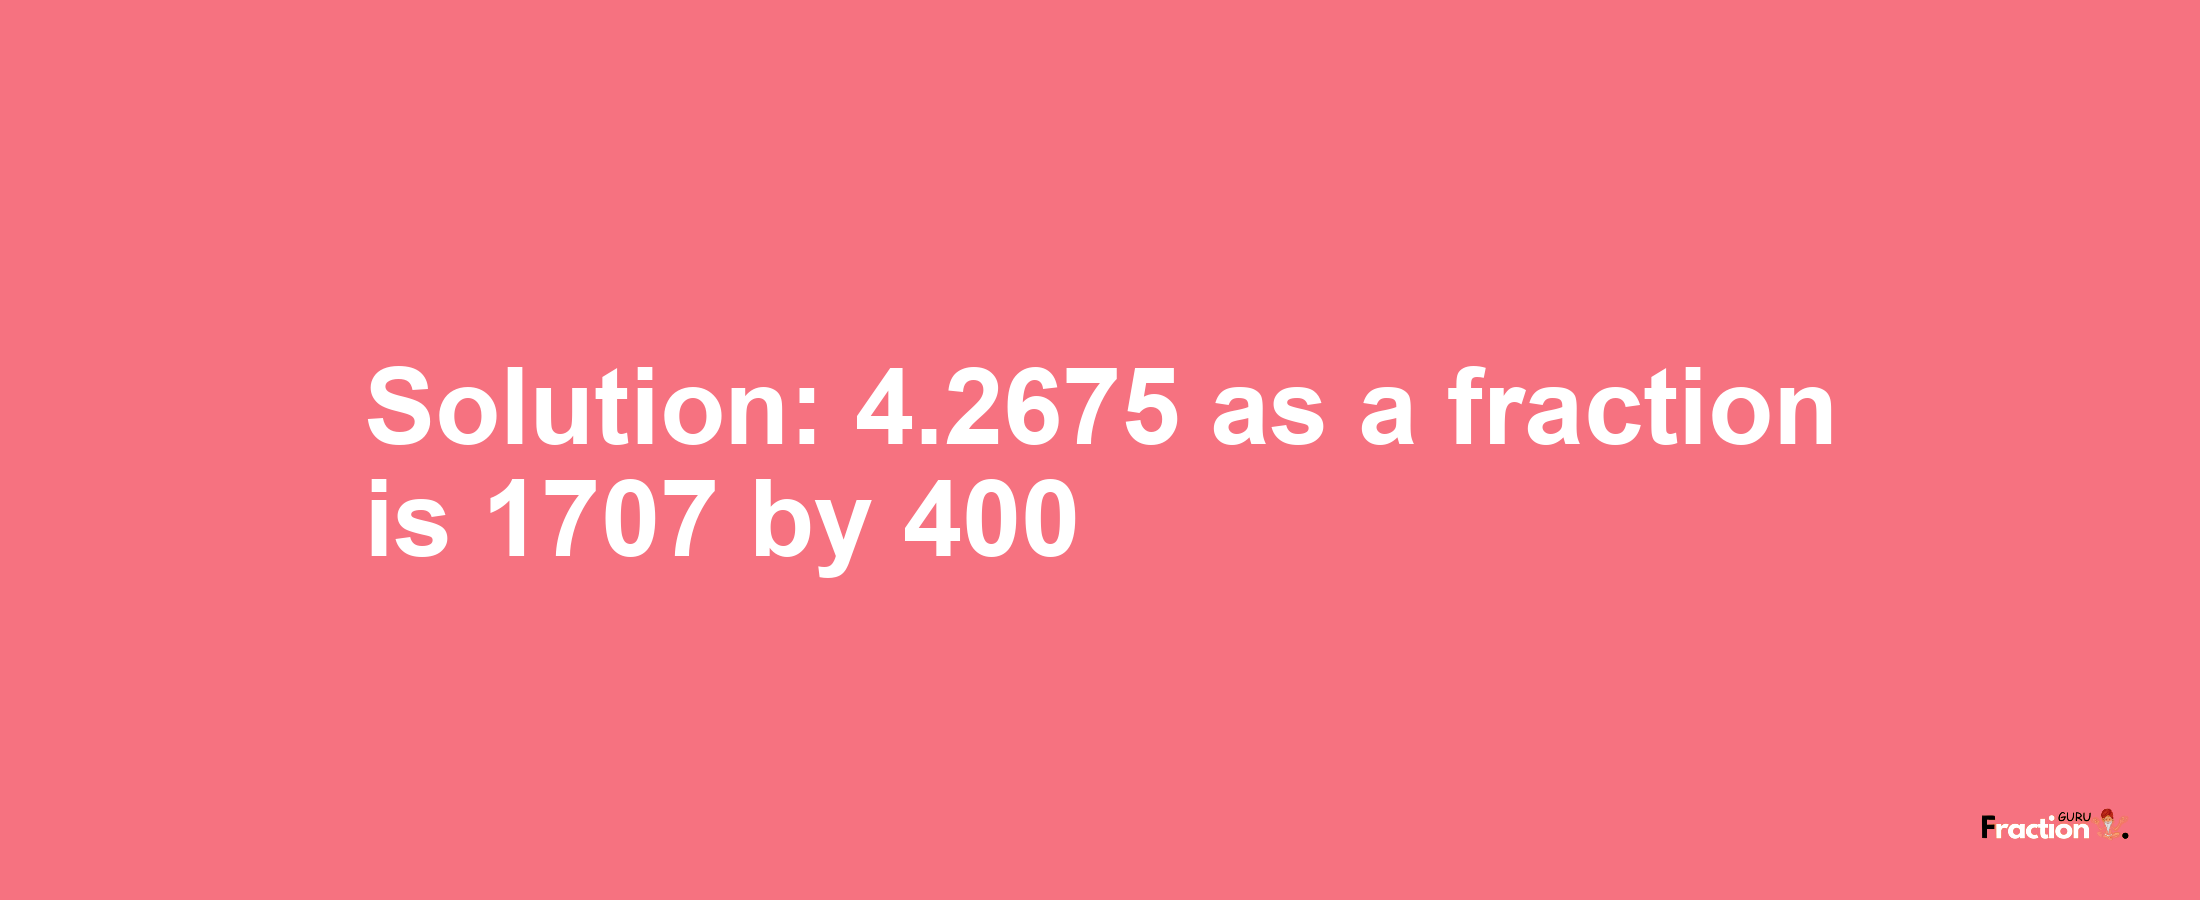 Solution:4.2675 as a fraction is 1707/400